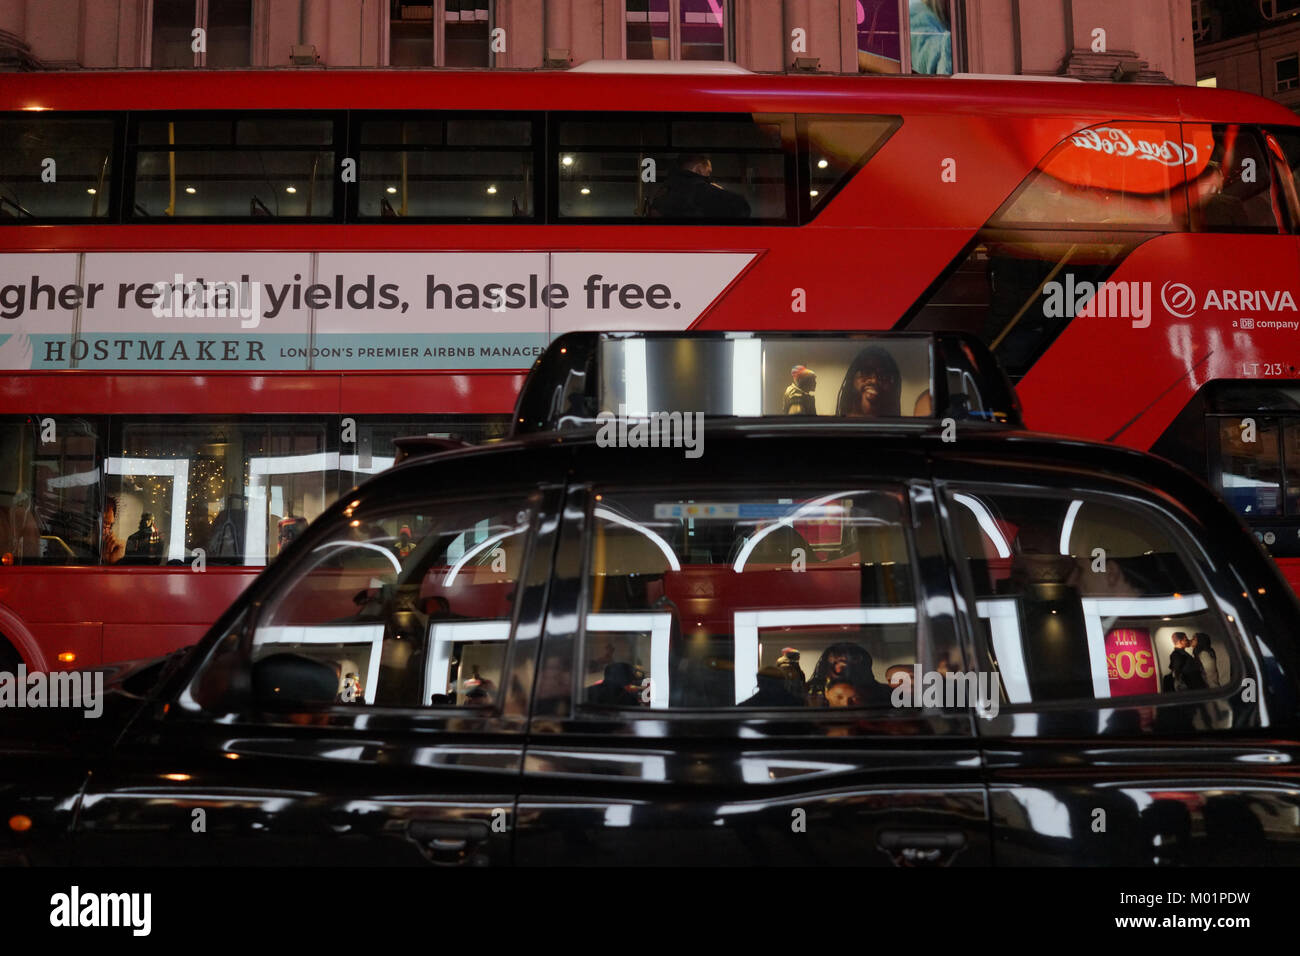 London bus and London black taxi cab Stock Photo